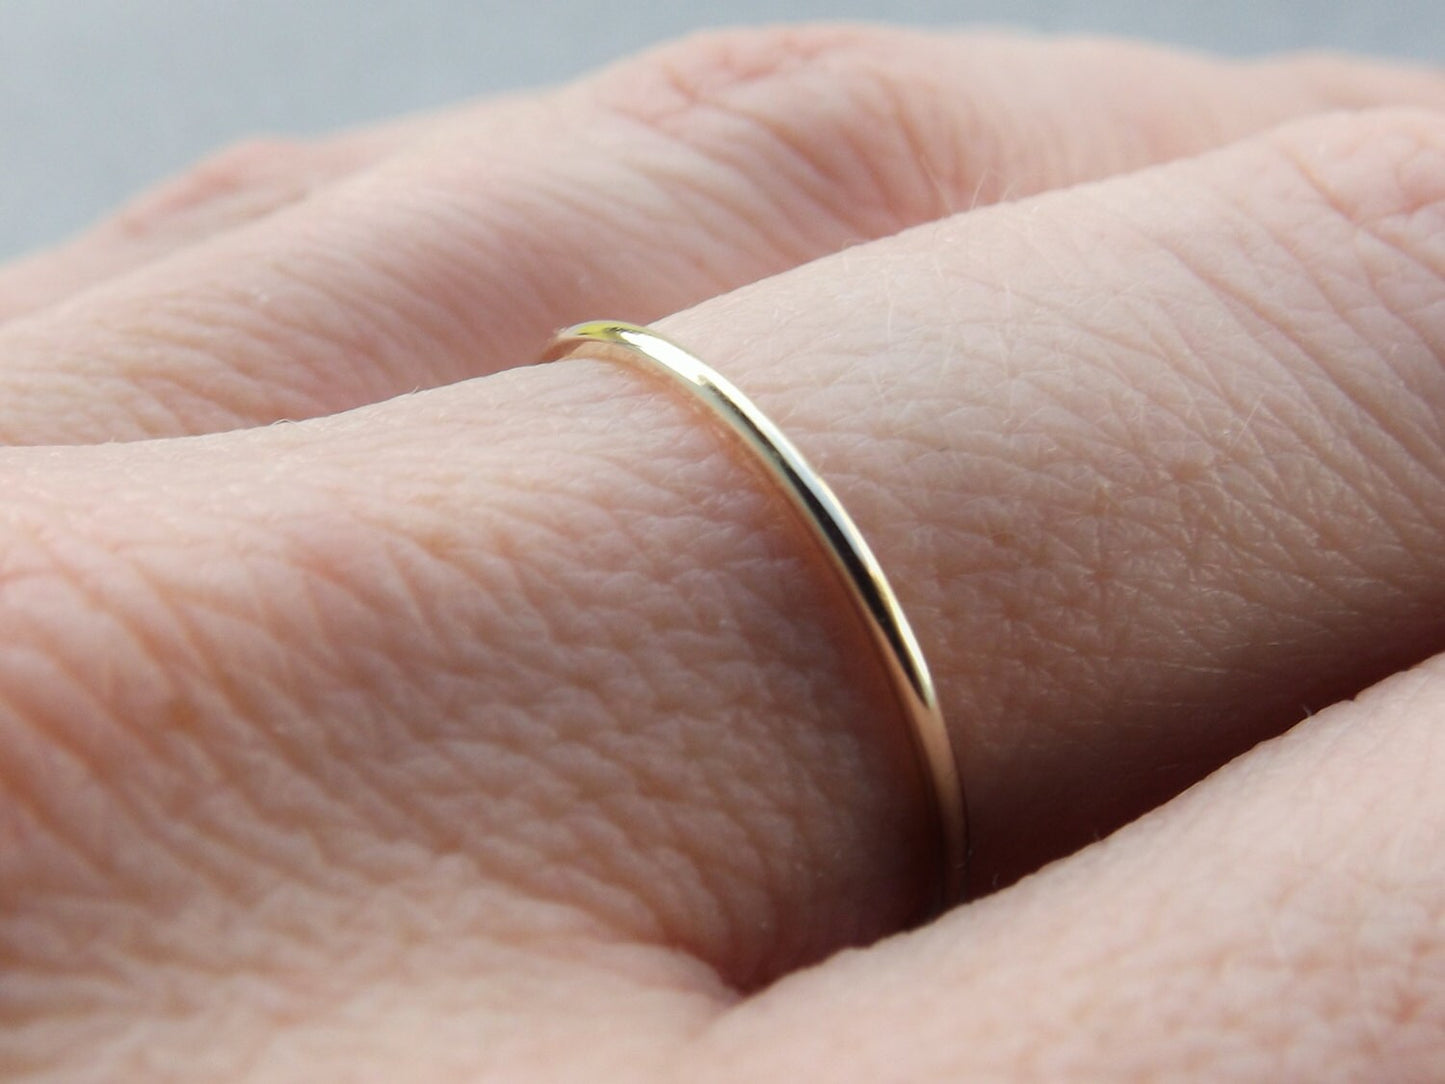 1 Smooth Slim Gold Stacking Ring,Knuckle, or Thumb Rings,Gold Rings,Stacking Rings,Knuckle Rings,Skinny Rings,Thin Rings, Slim Ring